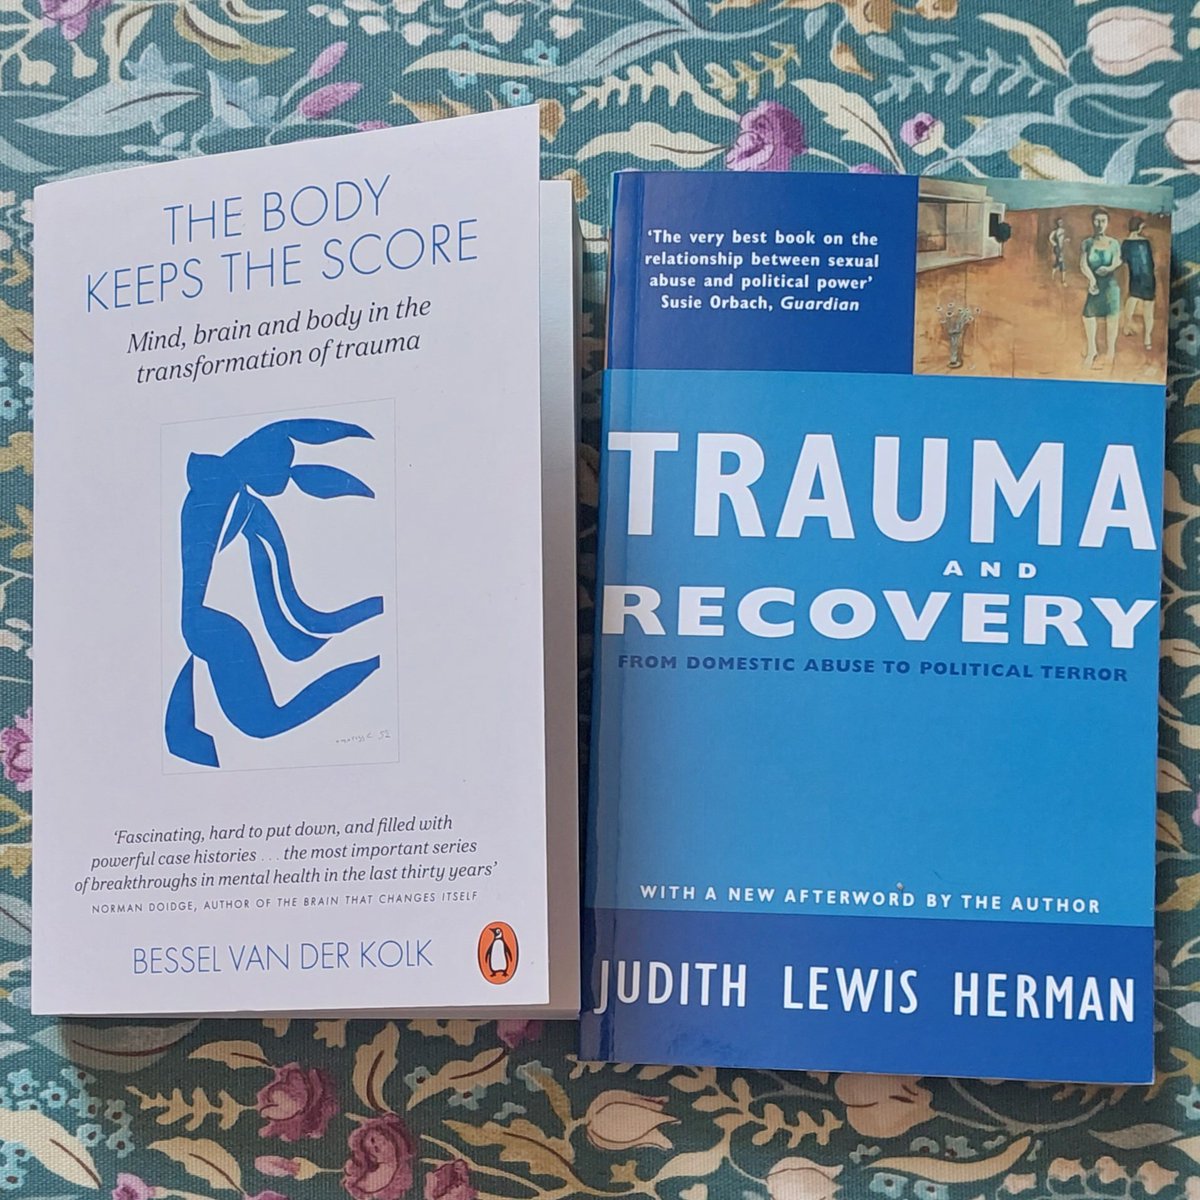 Contemplating the inextricability of violence and trauma, and how both can be best responded to in the context of intersectionality. 
Can't go wrong with revisiting Van Der Kolk's and Herman's seminal works. 

#PhD #Violence #Trauma #Research #ReadingNow